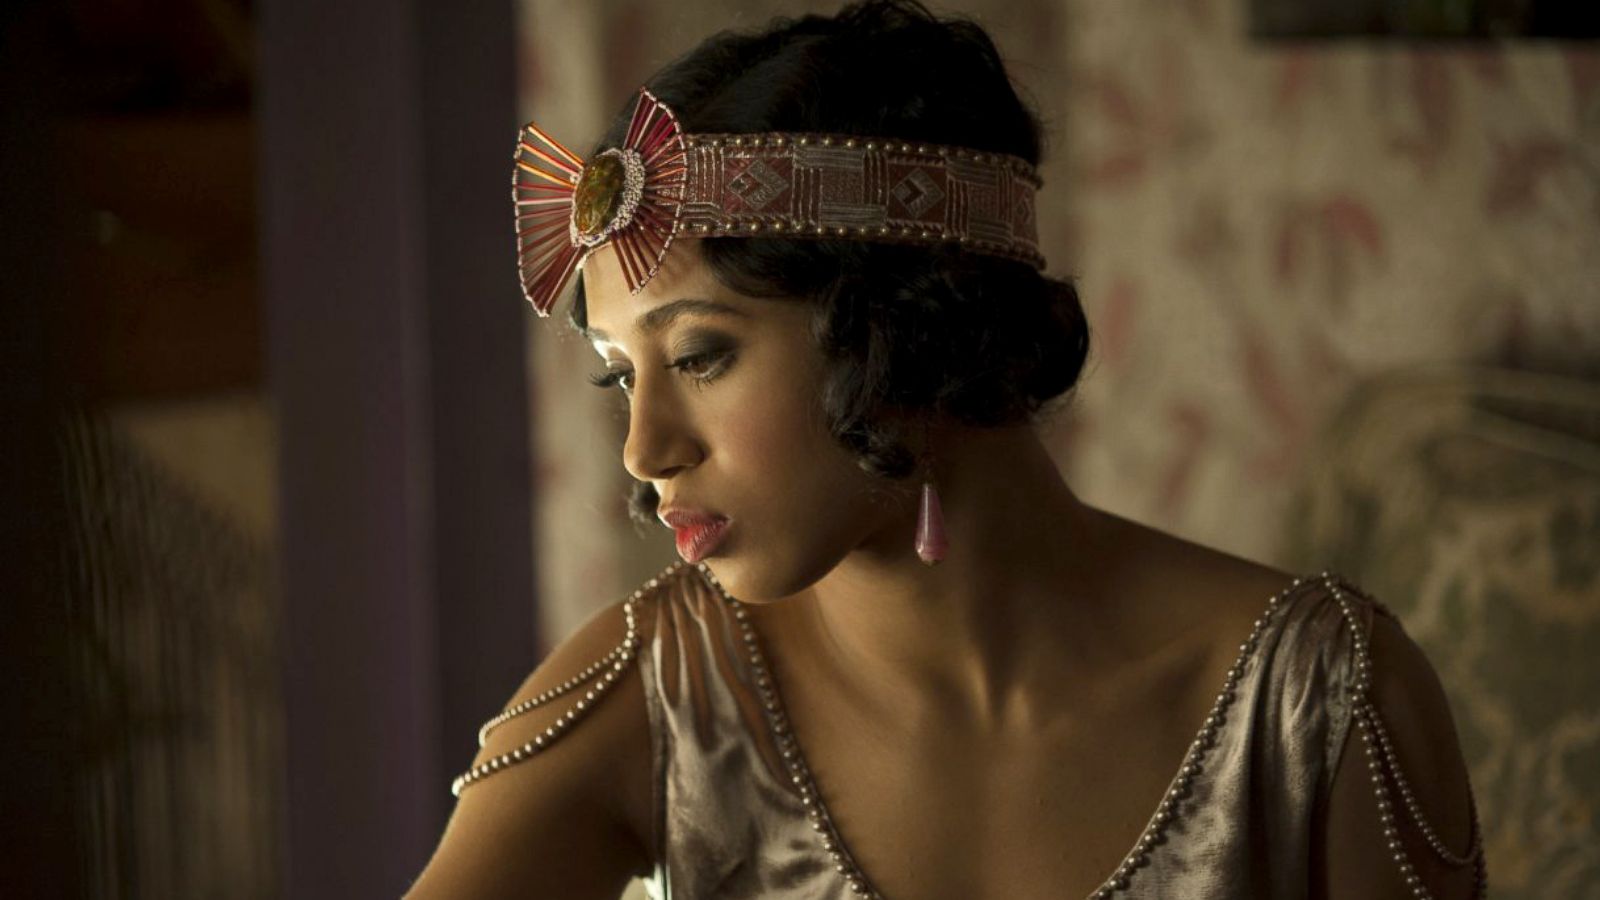 Actress, Singer Margot Bingham Talks 'Boardwalk Empire,' 'Barbershop' and How Meditation Helps With Anxiety